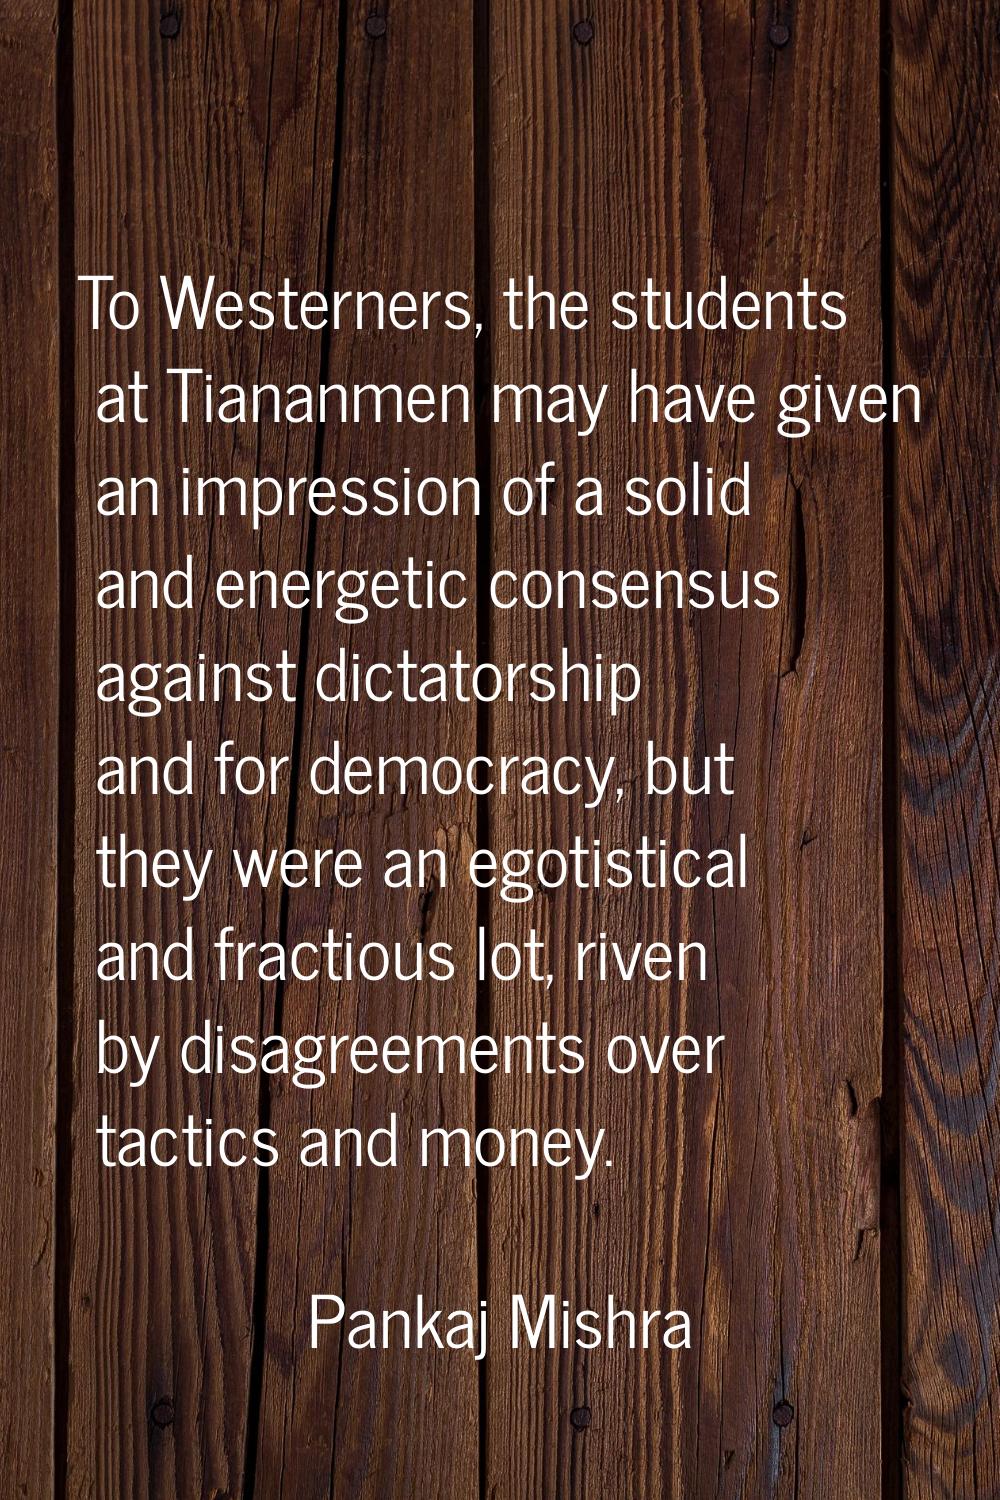 To Westerners, the students at Tiananmen may have given an impression of a solid and energetic cons